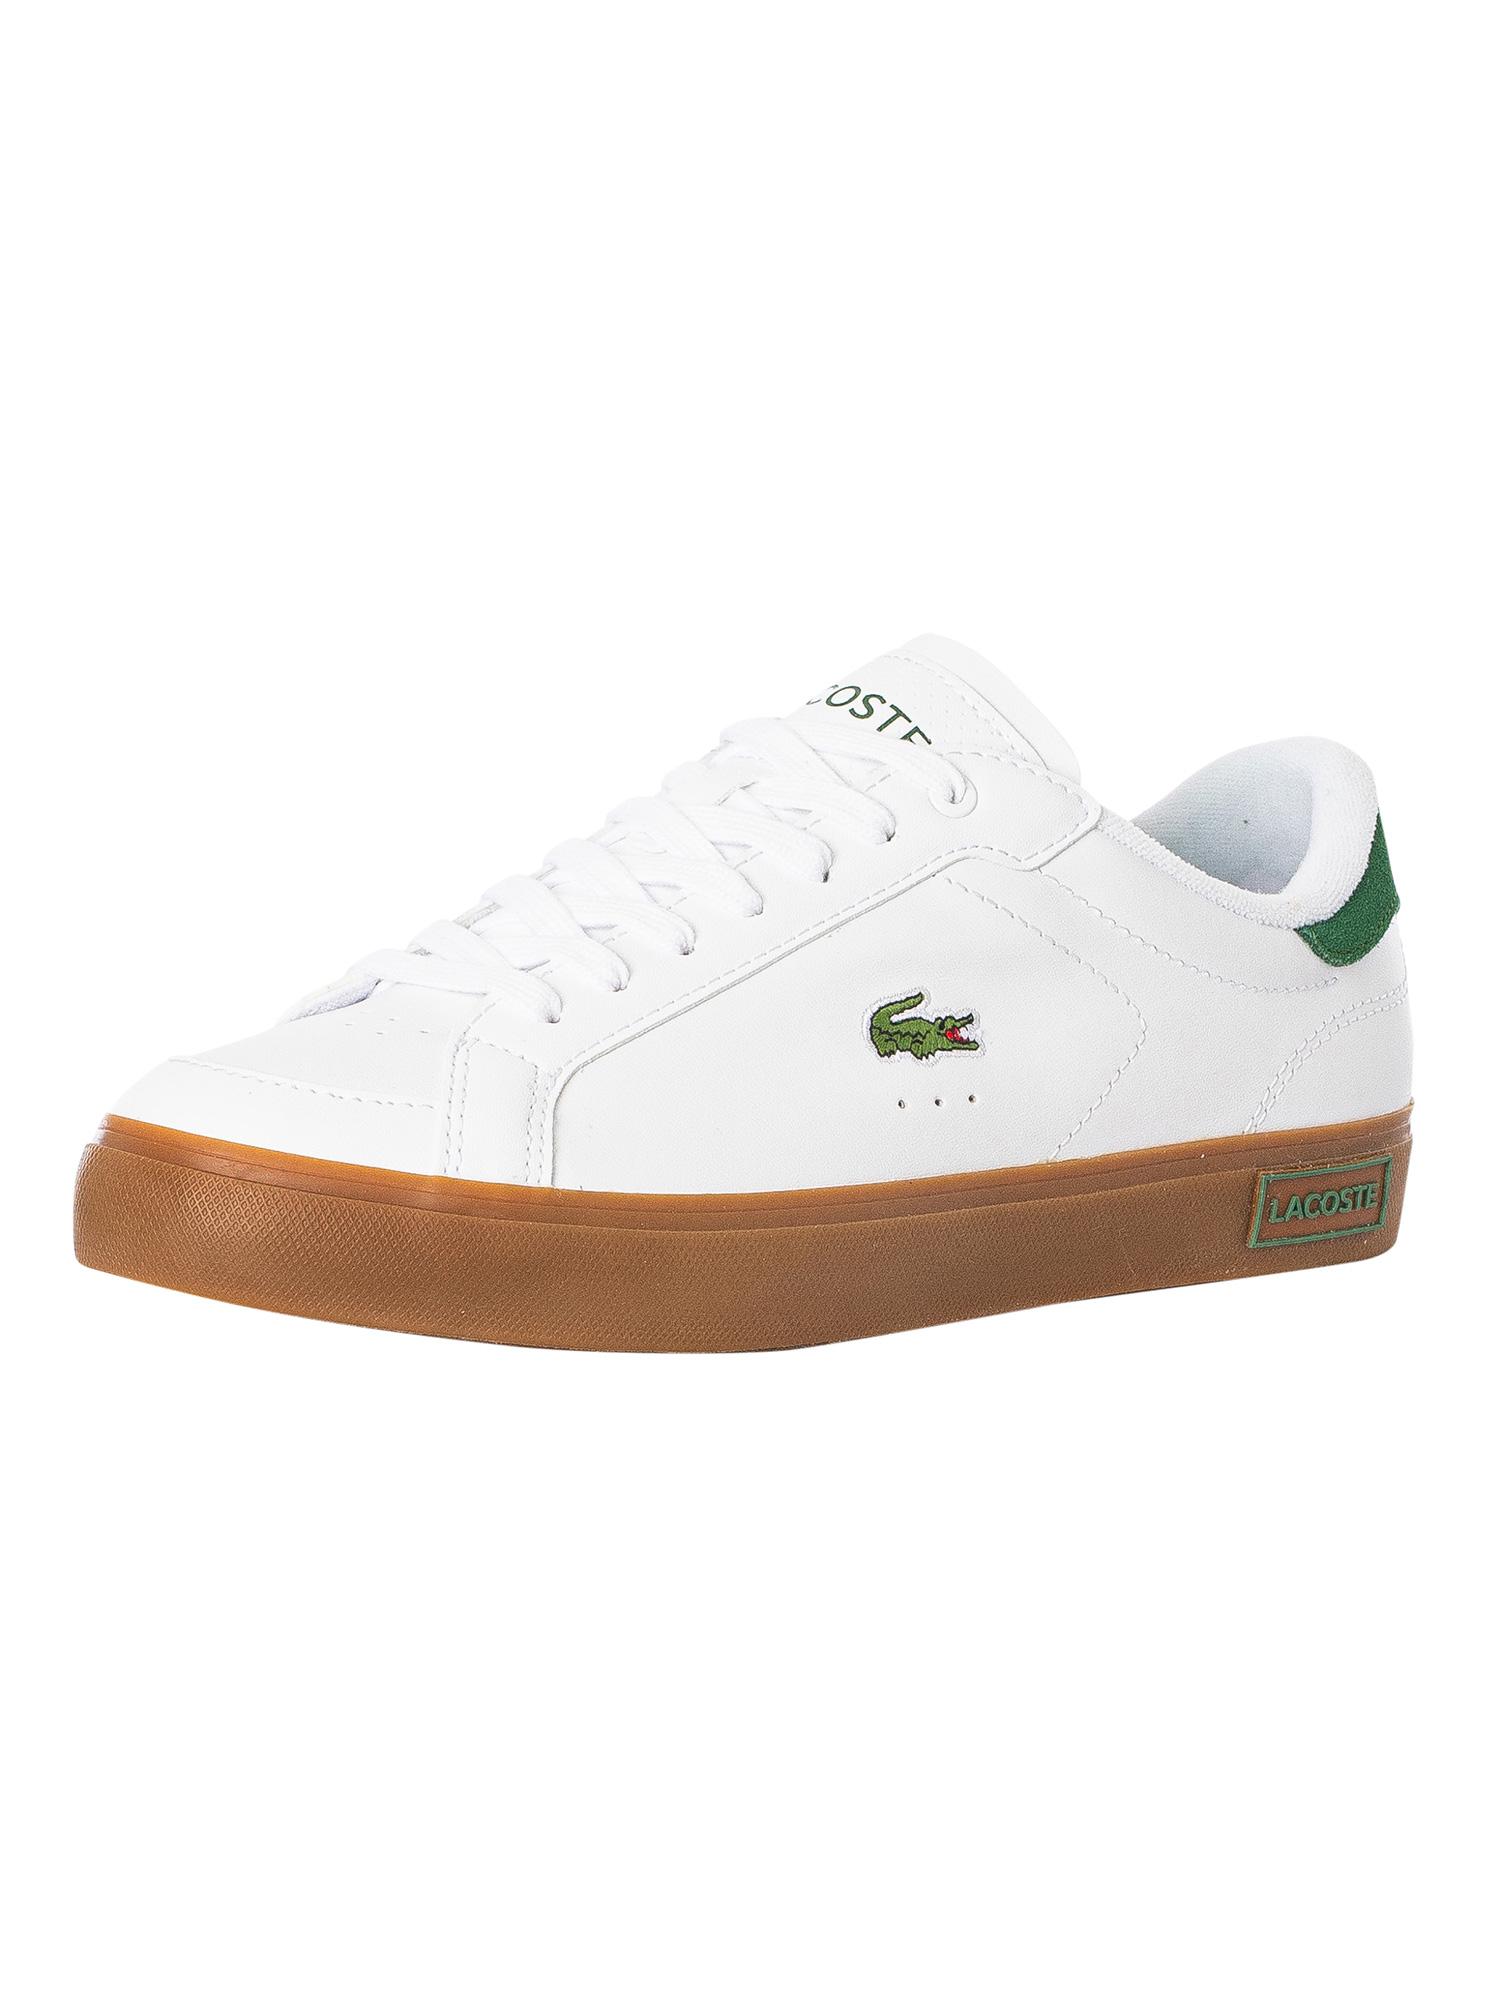 oplichter Postbode Cumulatief Lacoste Powercourt 123 1 Sma Leather Trainers in White for Men | Lyst